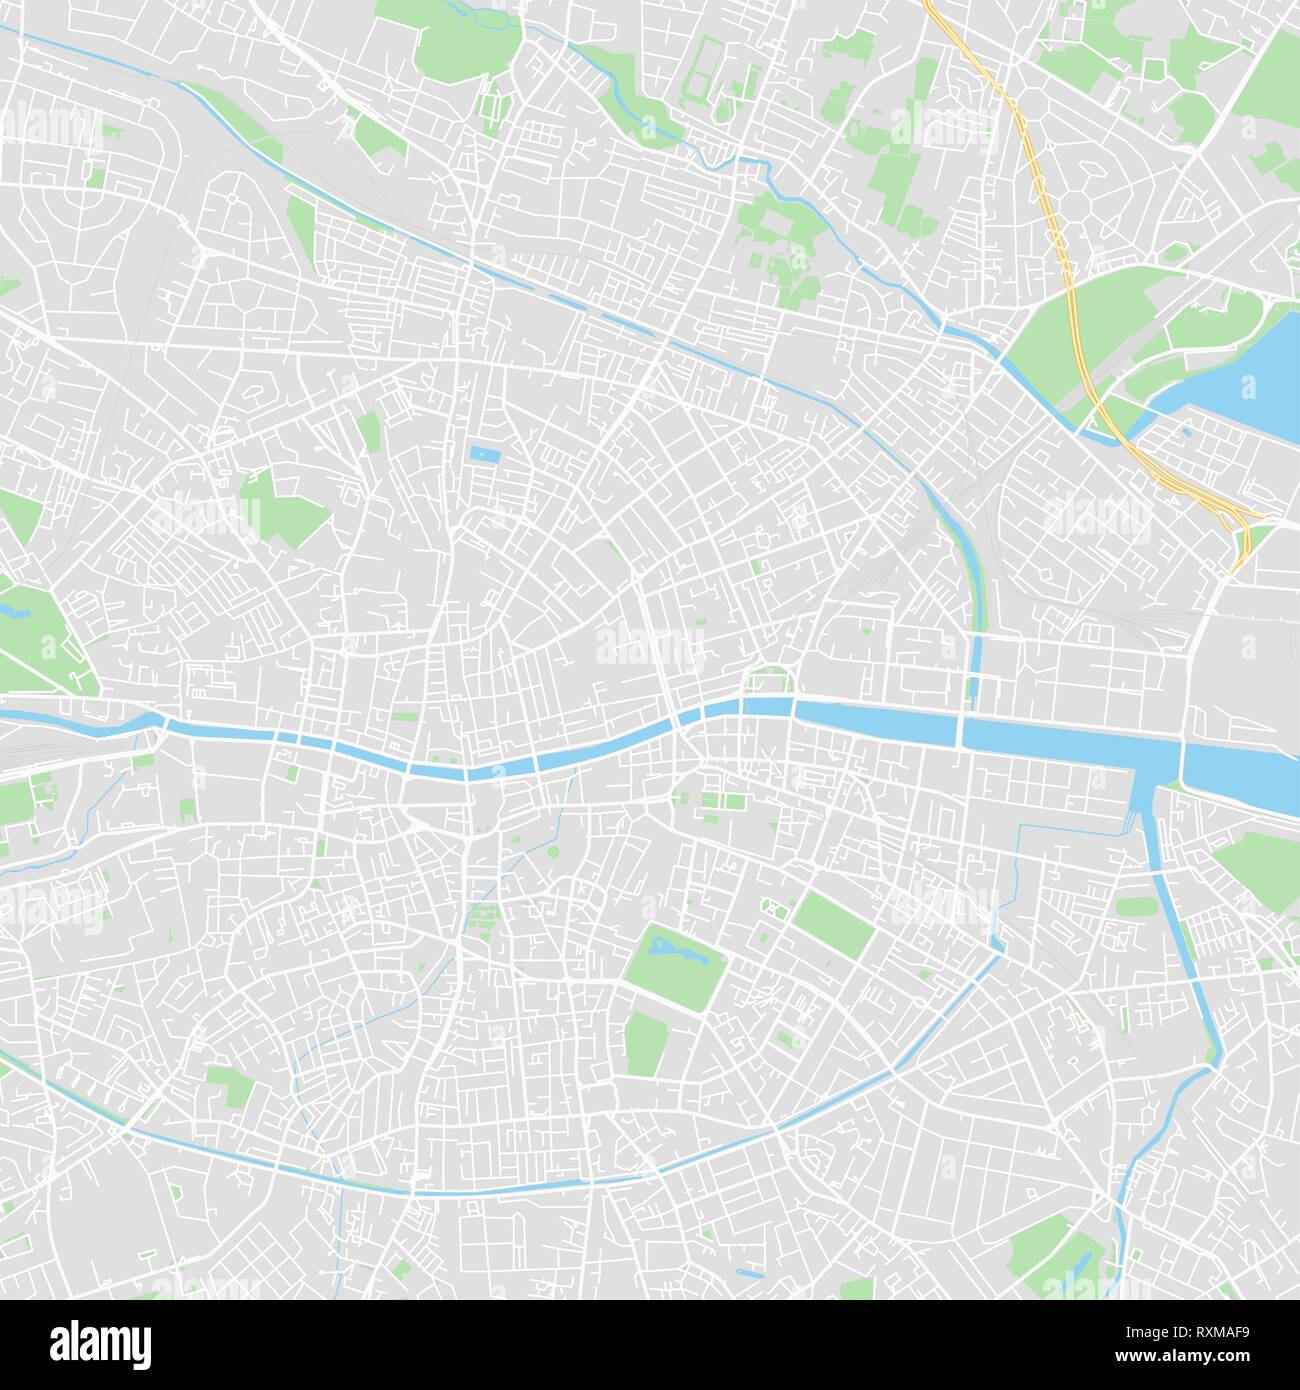 Downtown vector map of Dublin, Ireland. This printable map of Dublin contains lines and classic colored shapes for land mass, parks, water, major and  Stock Vector